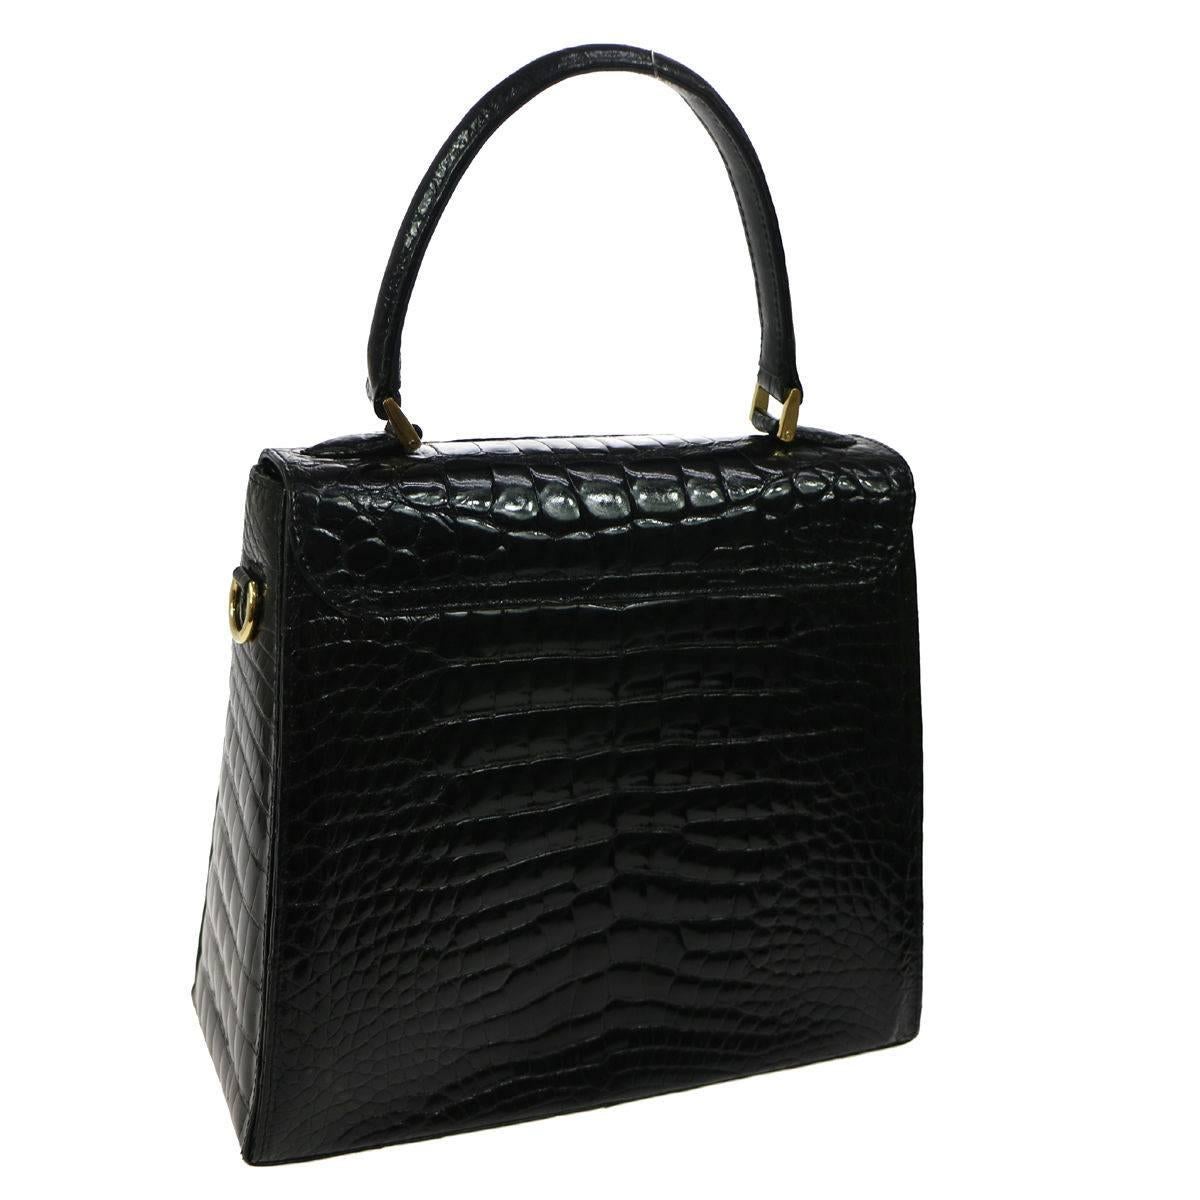 CURATOR'S NOTES

Salvatore Ferragamo Black Rare Kelly Evening Top Handle Satchel Bag  

Crocodile
Gold tone hardware
Turnlock closure
Leather lining 
Made in Italy
Handle drop 4.5"
Measures 10" W x 9.5" H x 4" D